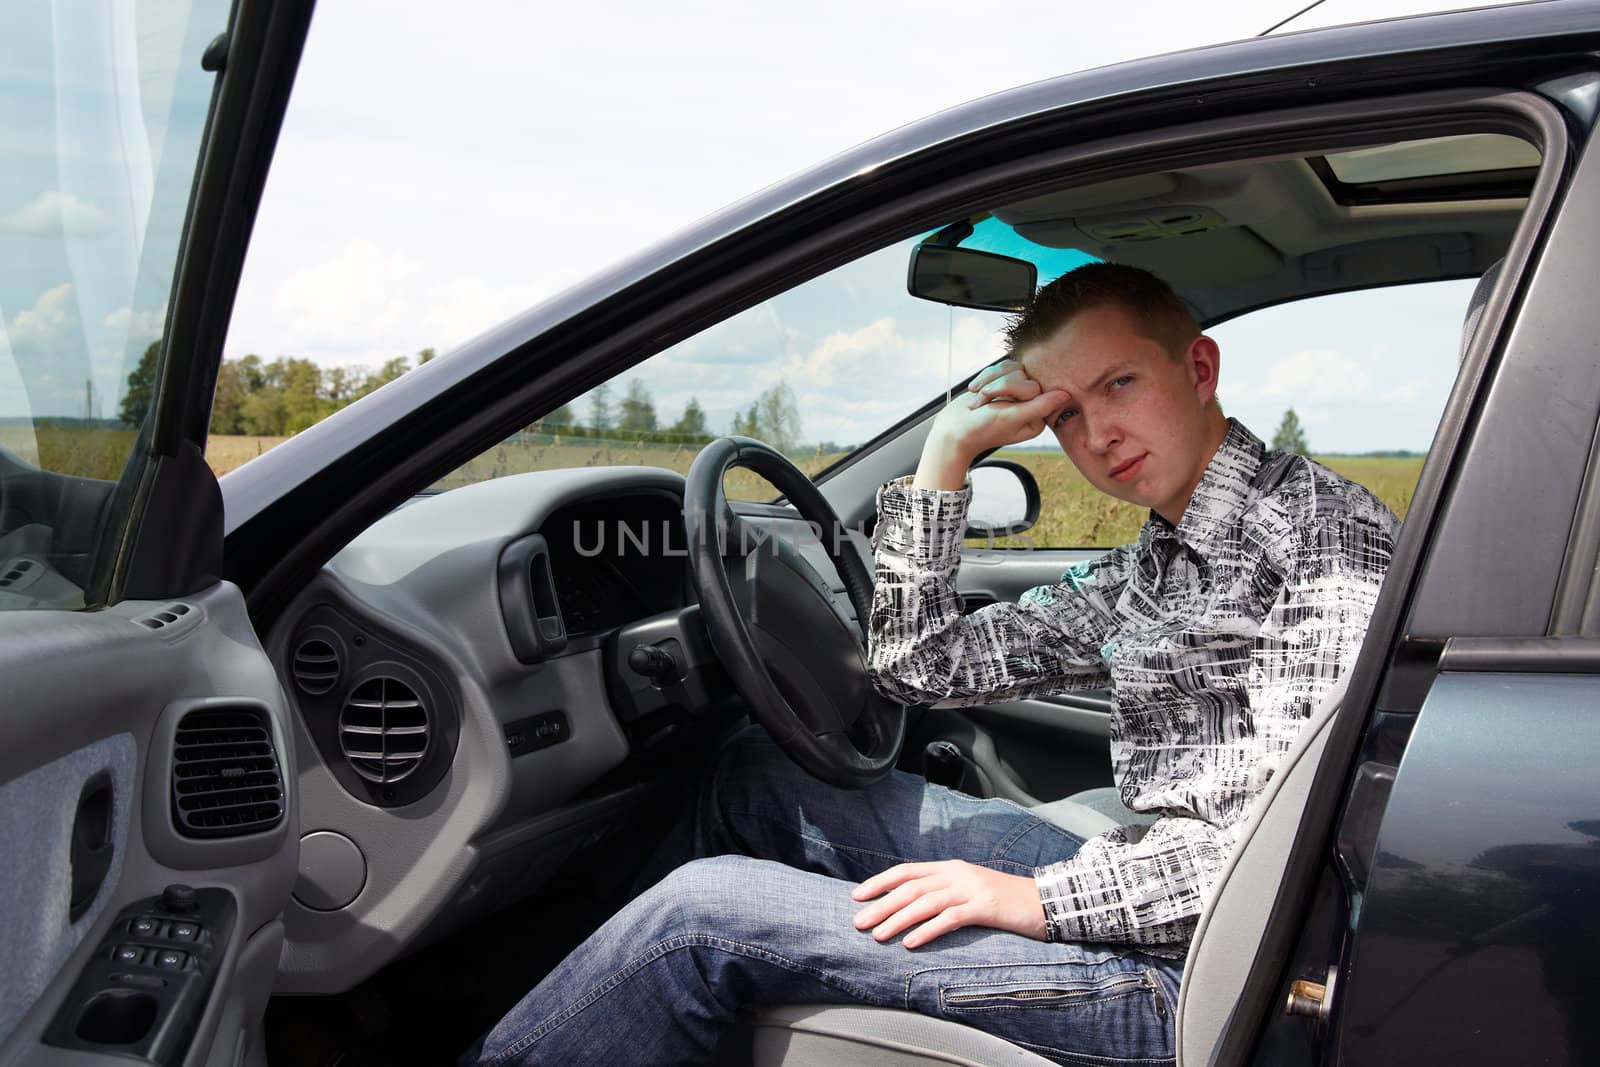 After the driving test young drivers reflect on the errors